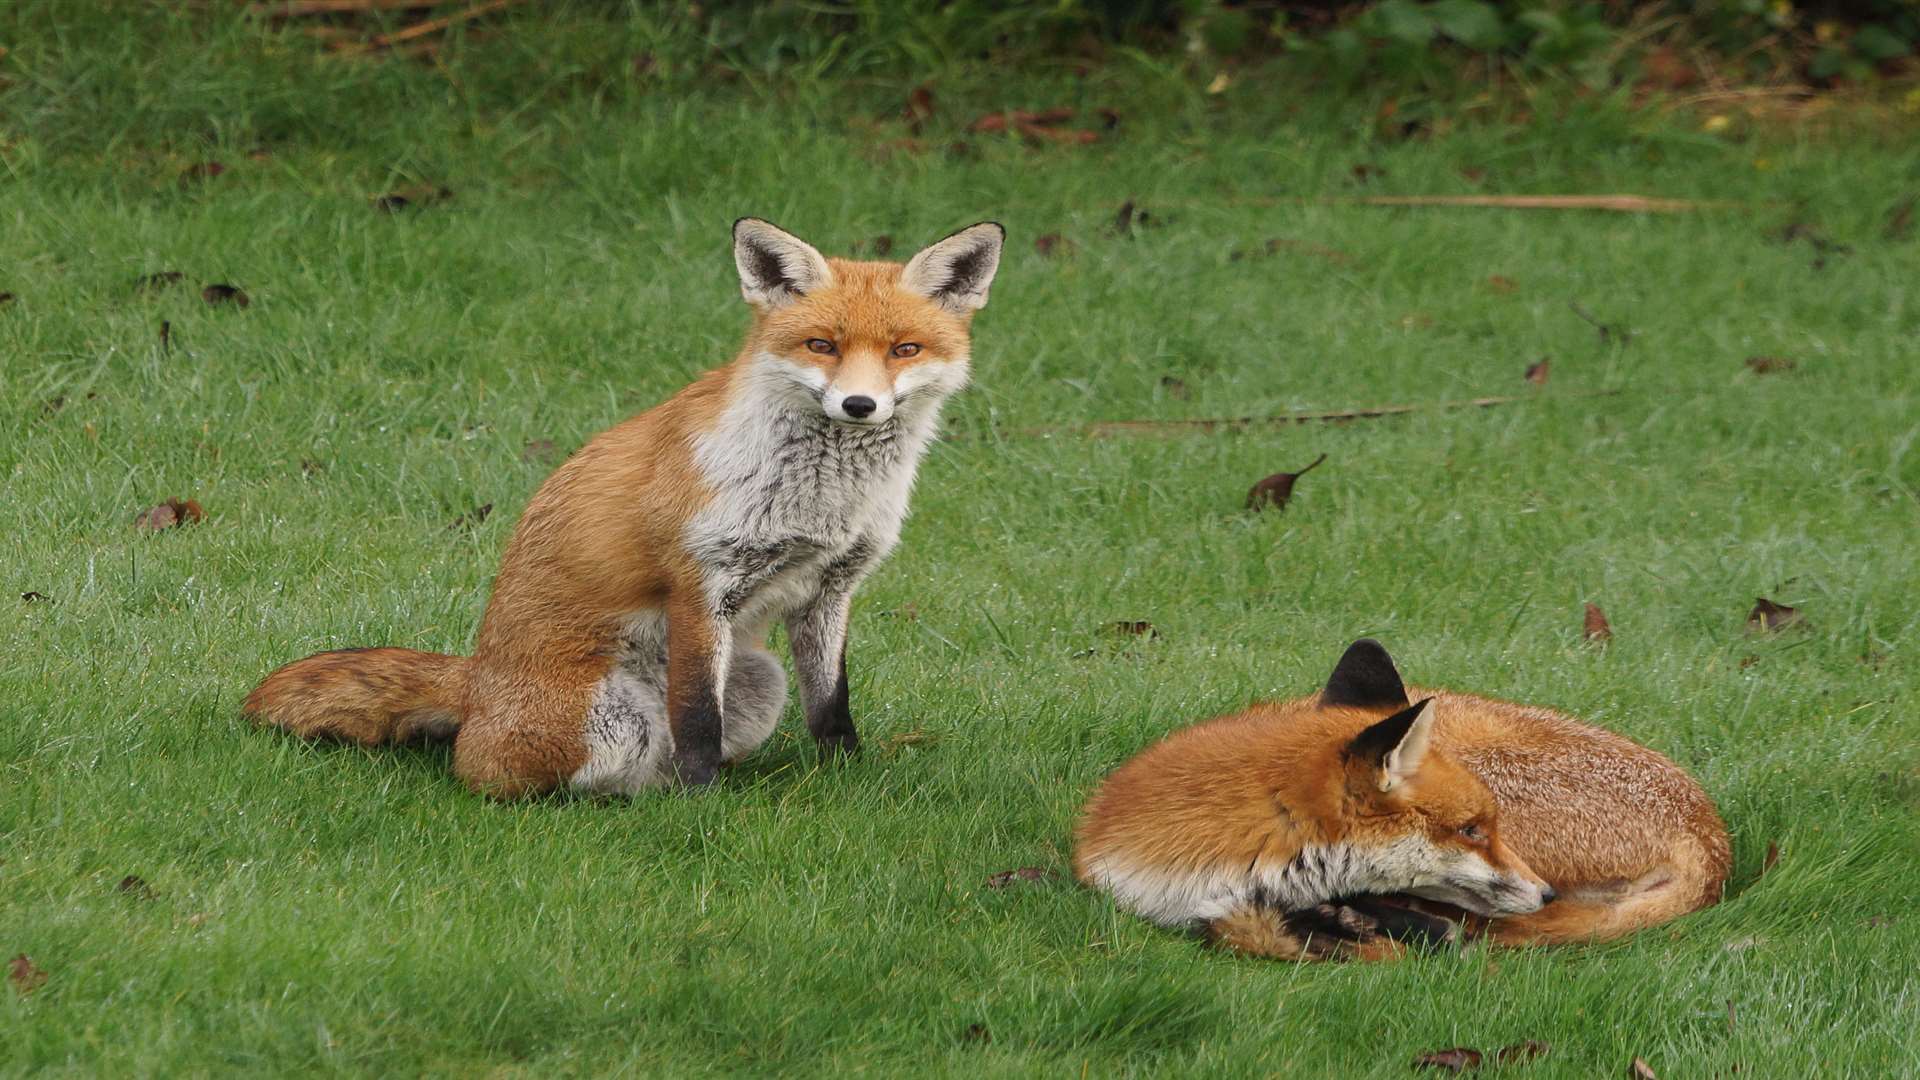 Saboteurs arrived at the hunt concerned for foxes in the area. Stock image